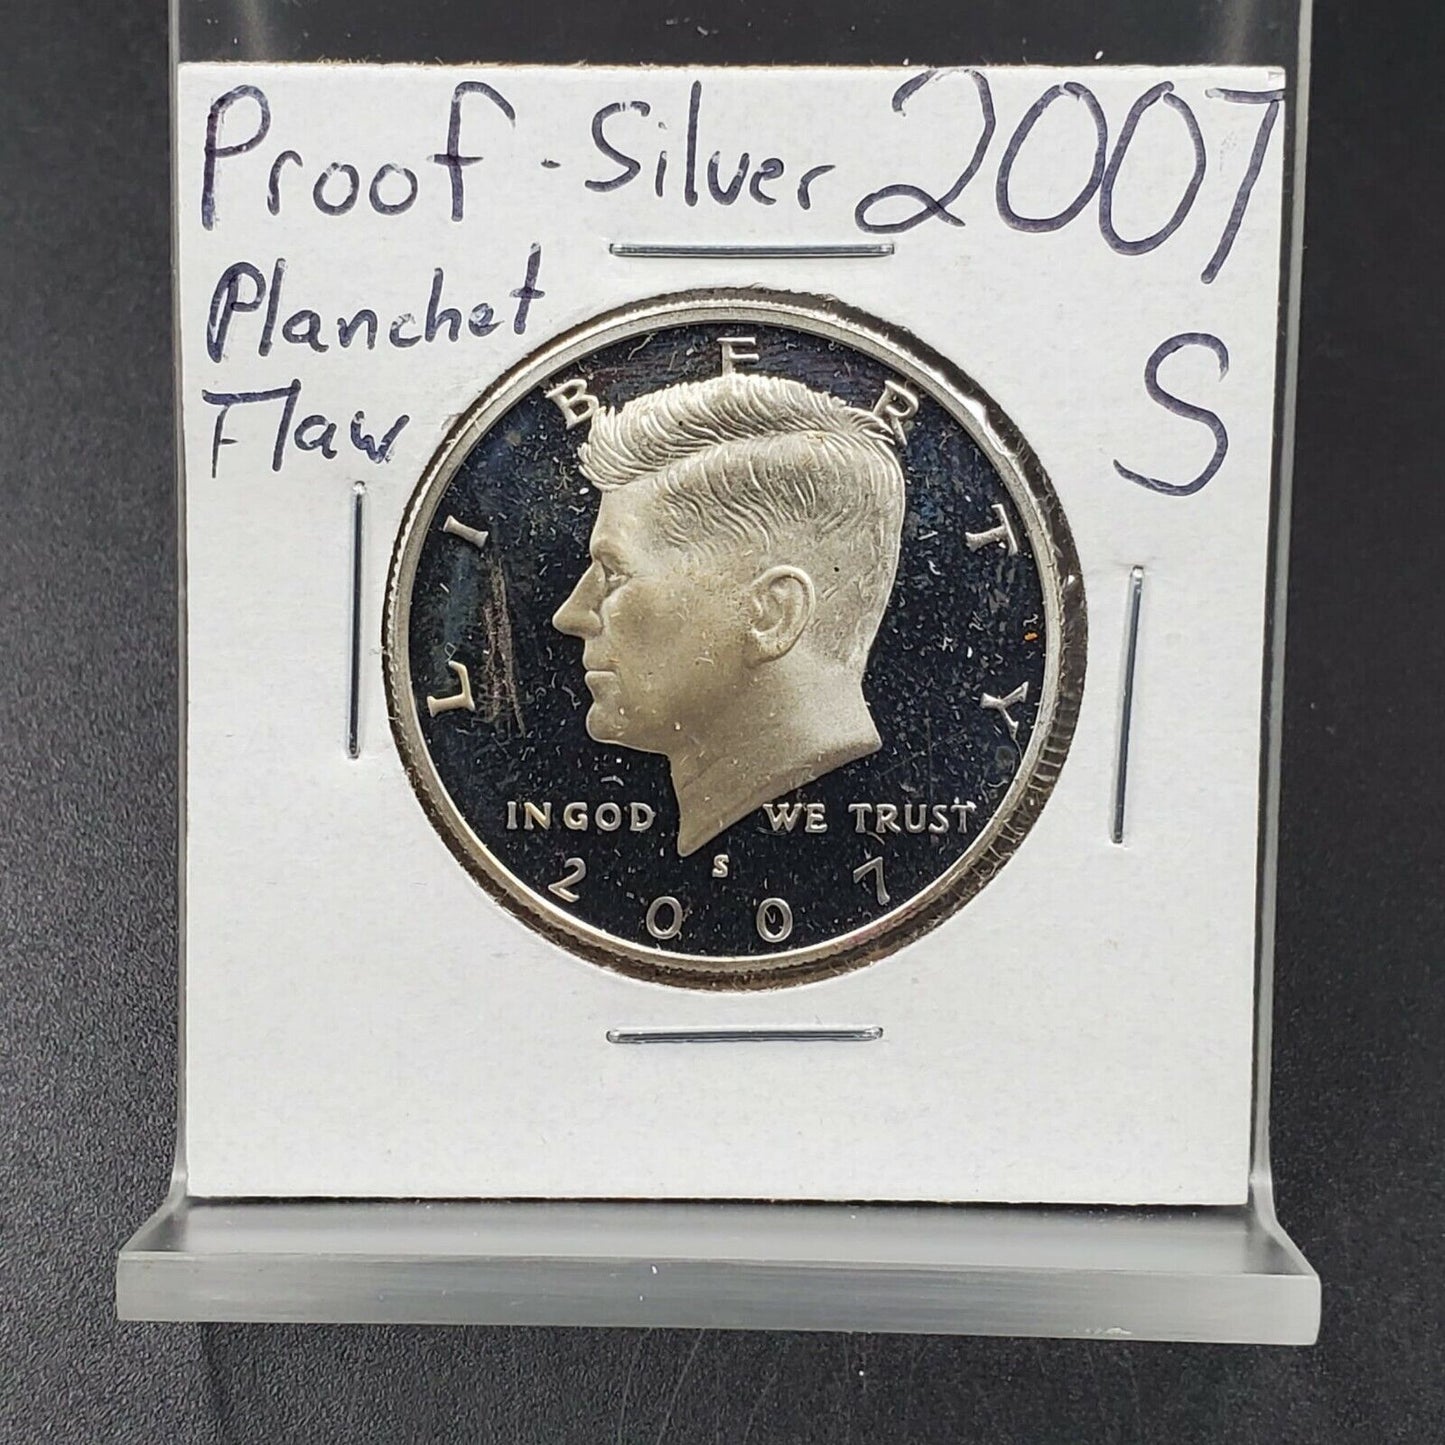 2007 S Silver Kennedy Half Dollar Coin Laminated String Planchet Flaw Obverse